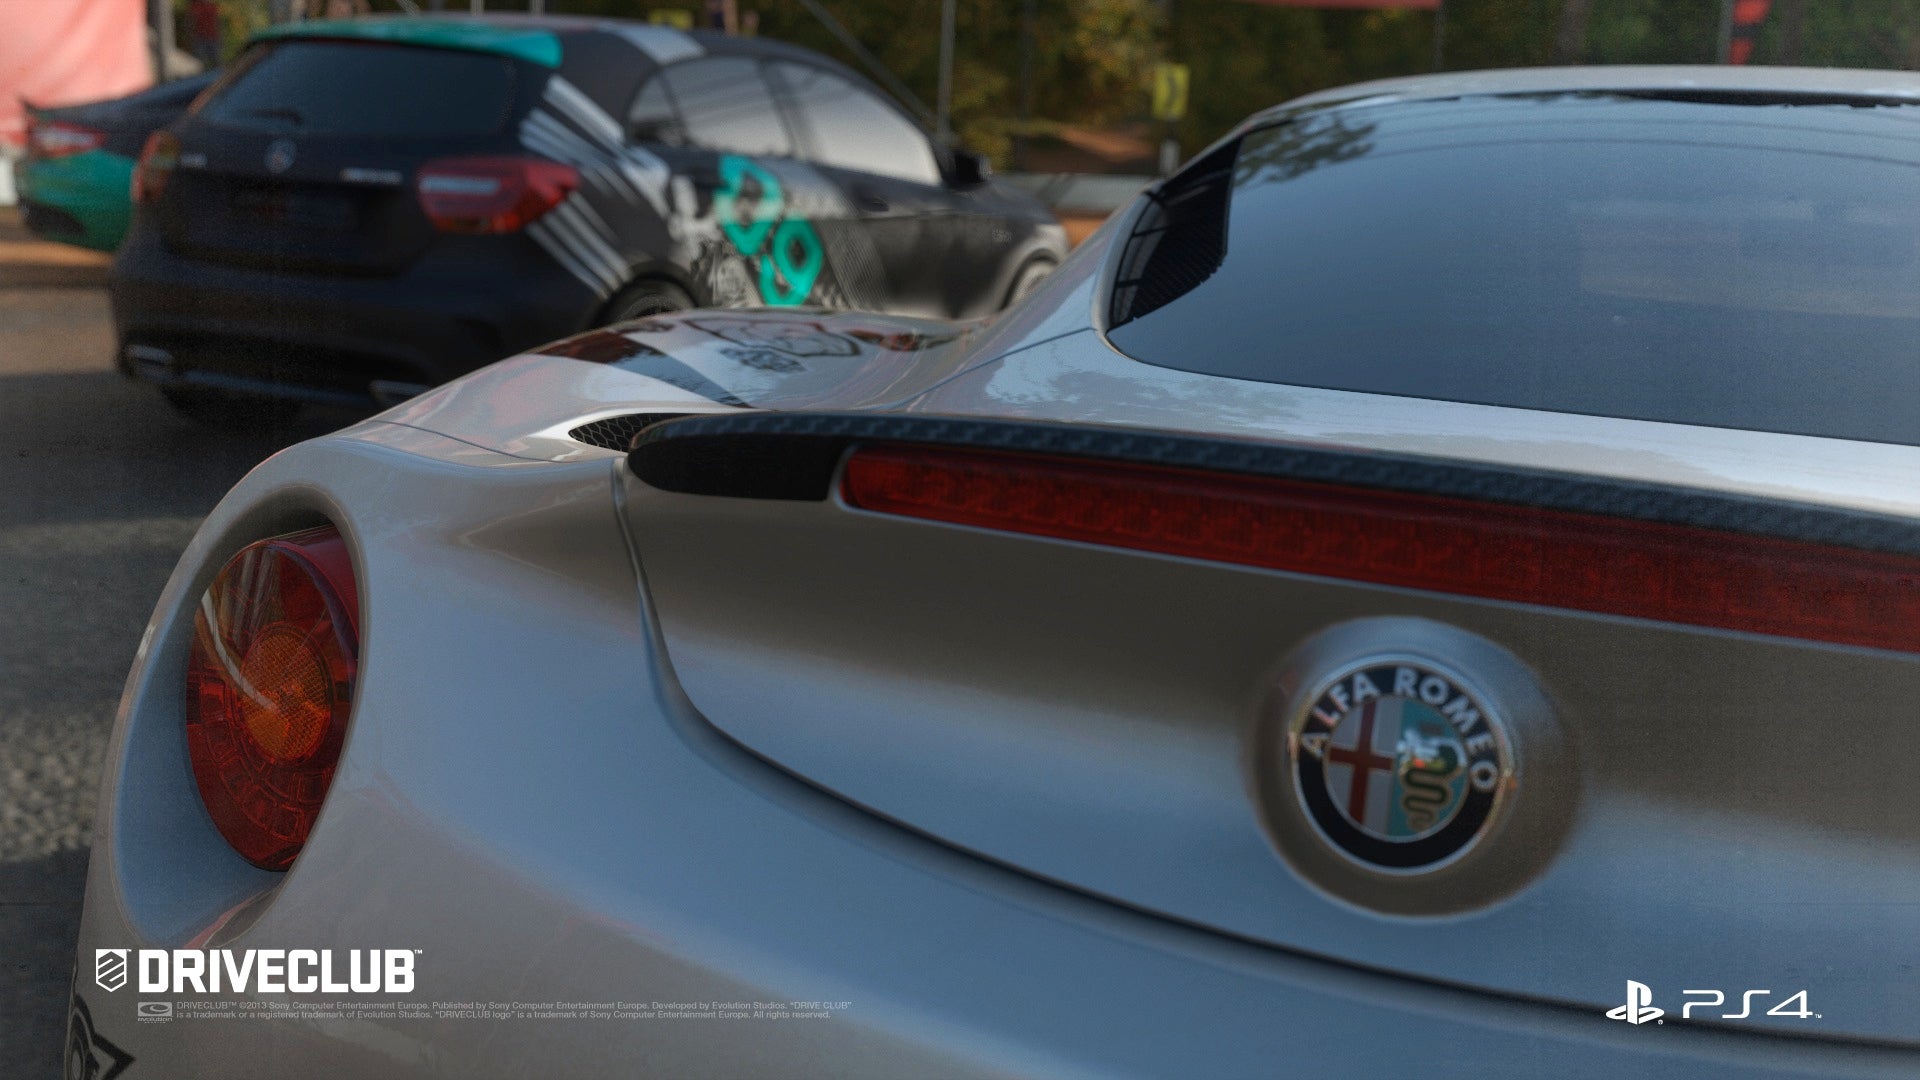 Image for Driveclub: "we're just as frustrated as you about server performance," says Evolution